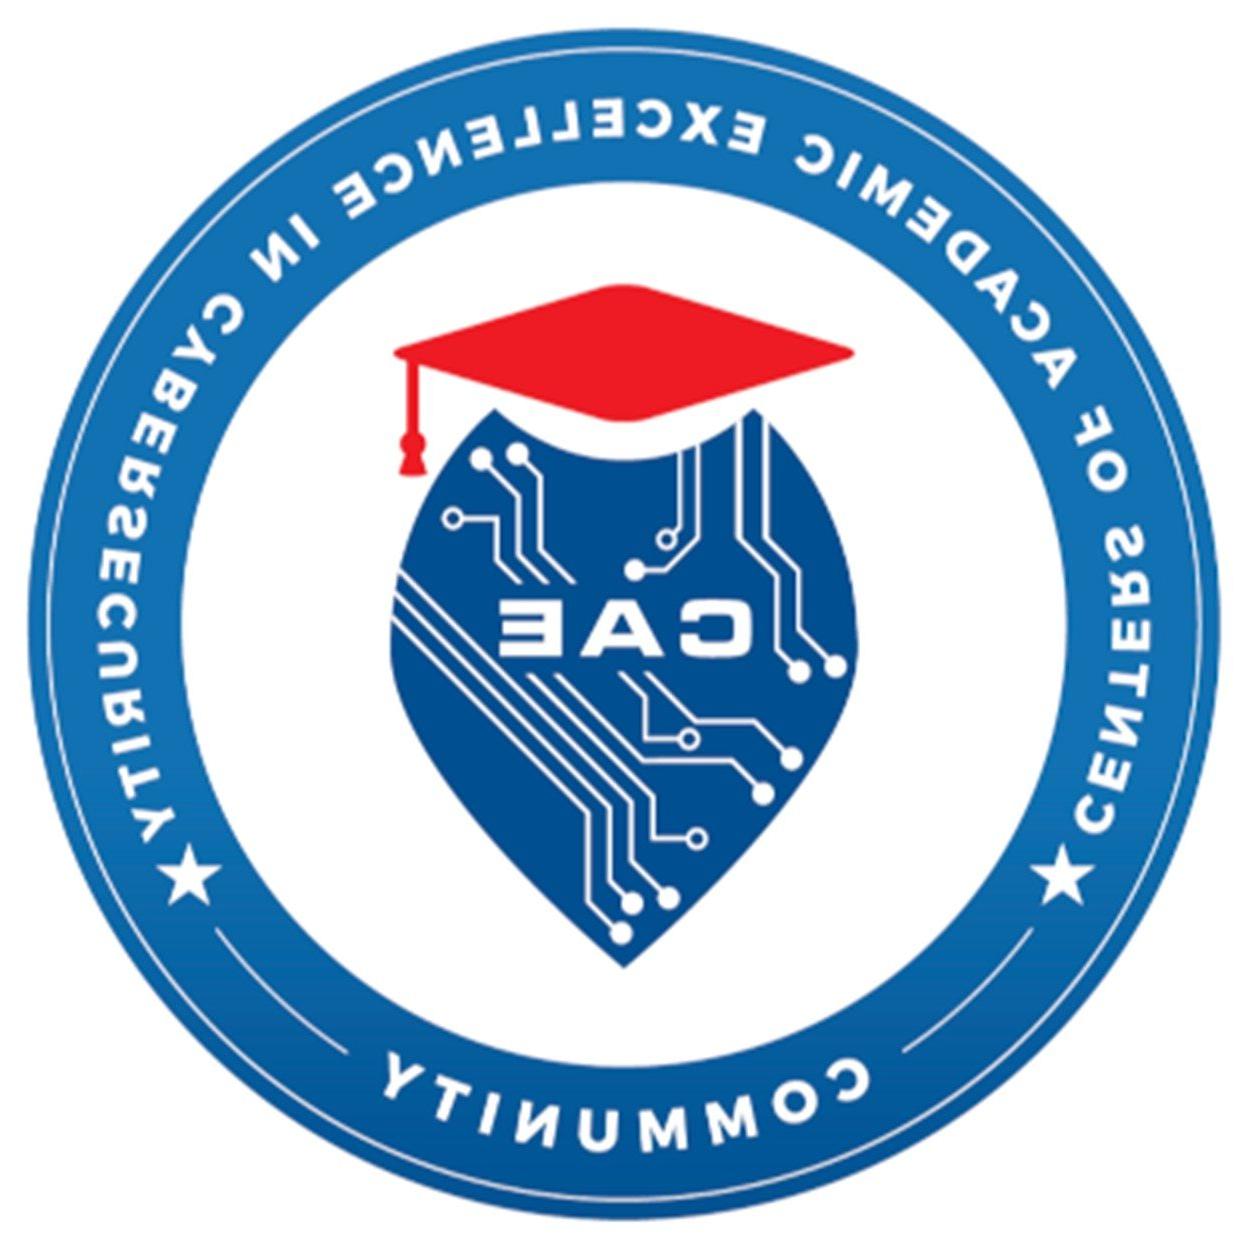 "National Centers of Academic Excellence in Cybersecurity"